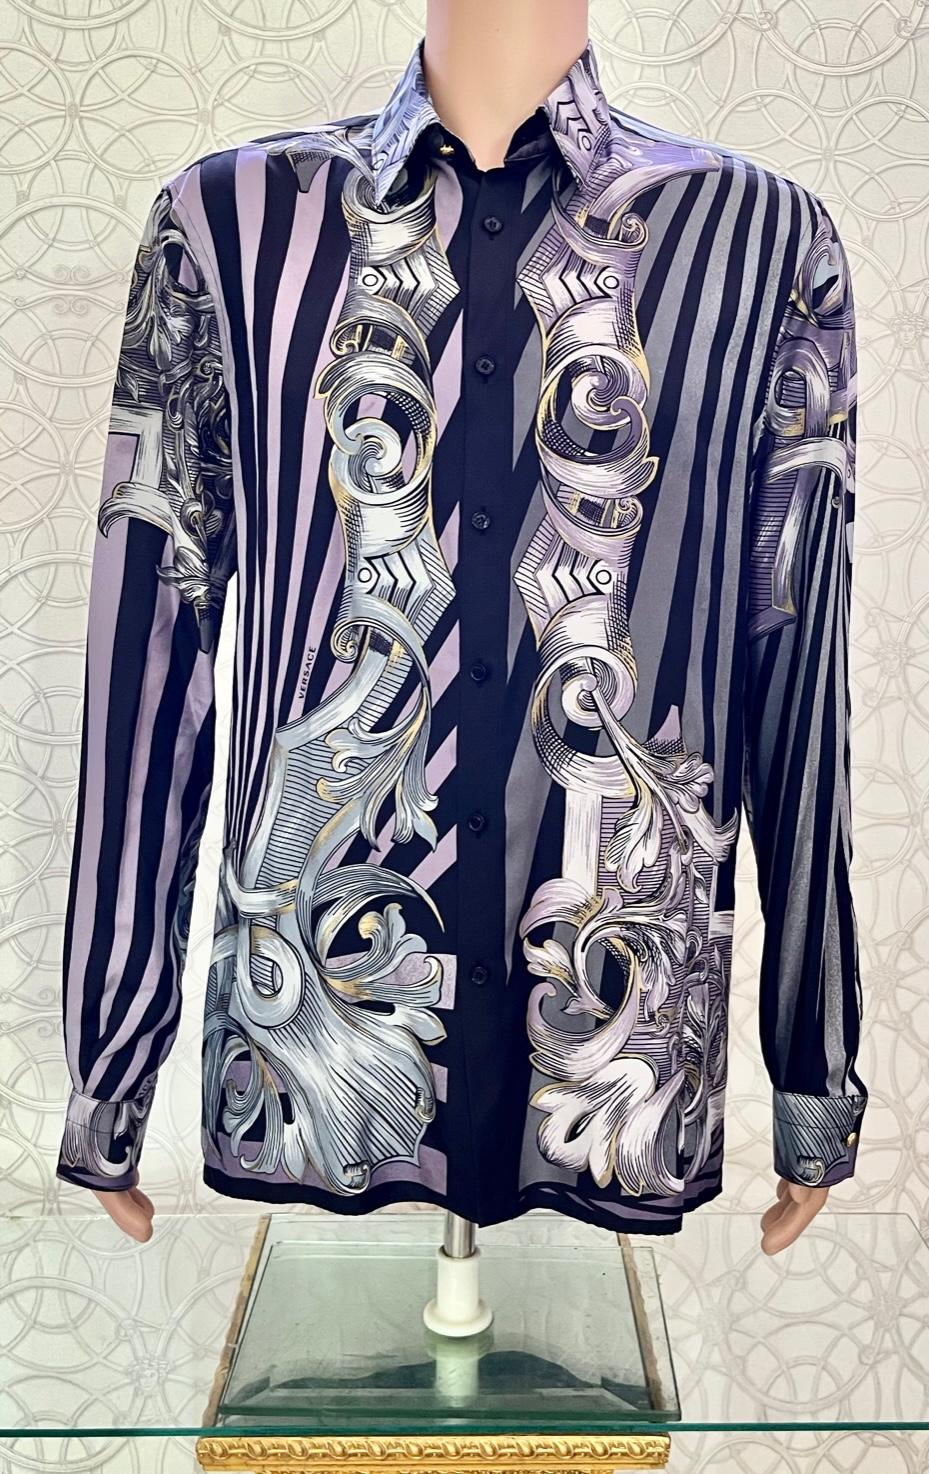 VERSACE SILK SHIRT

Demonstrate your taste for luxurious accessories and your love for Versace signed pieces with this rich silk shirt.
Relaxed fit
Signature buttons
Long sleeves 
Color: gray
Content: 100% silk


Made in Italy 

Size 40 - 50